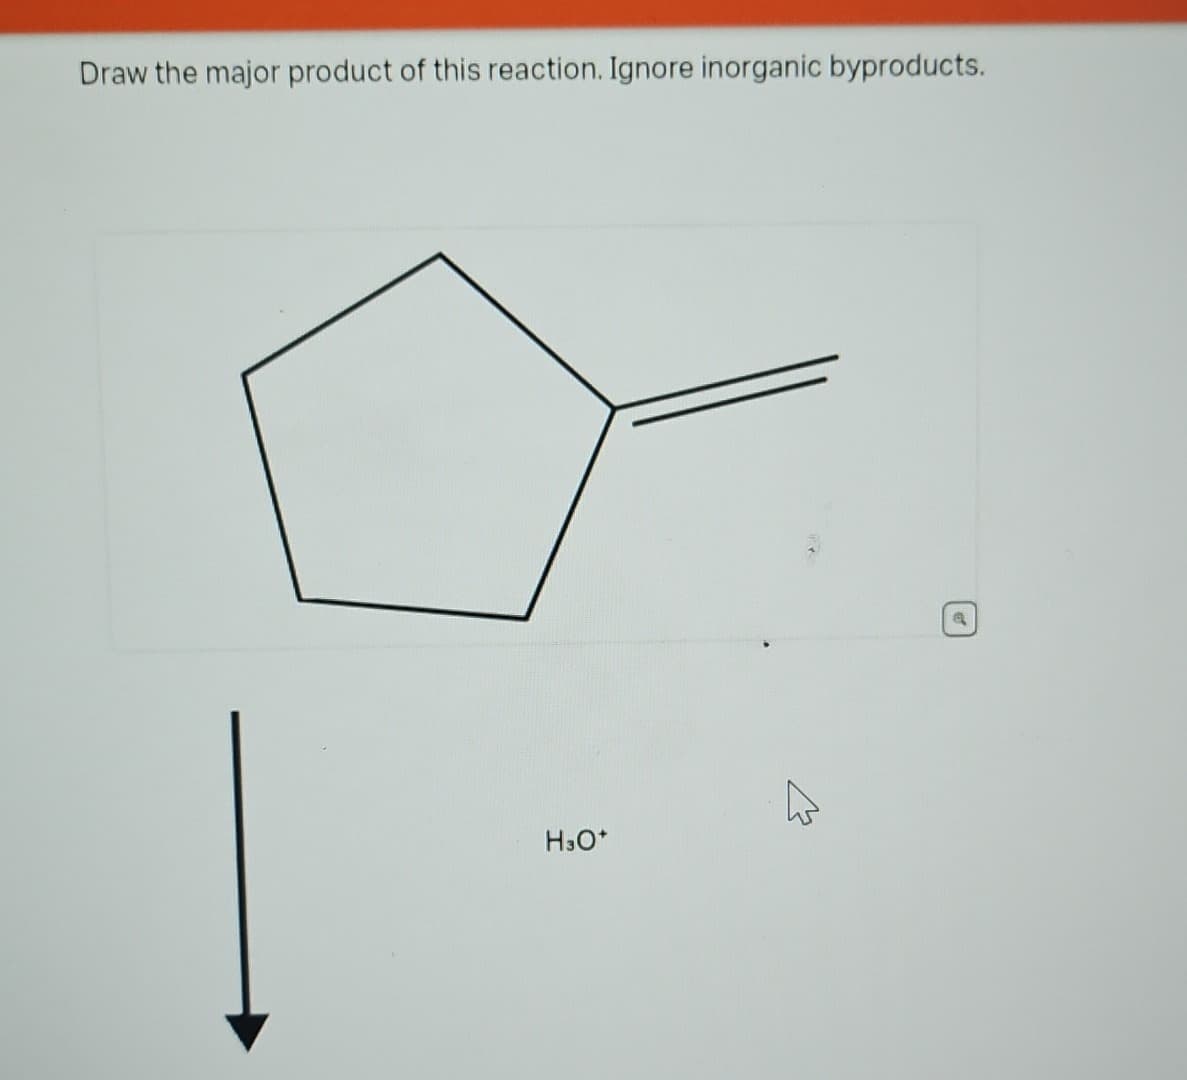 Draw the major product of this reaction. Ignore inorganic byproducts.
H3O*
W
a